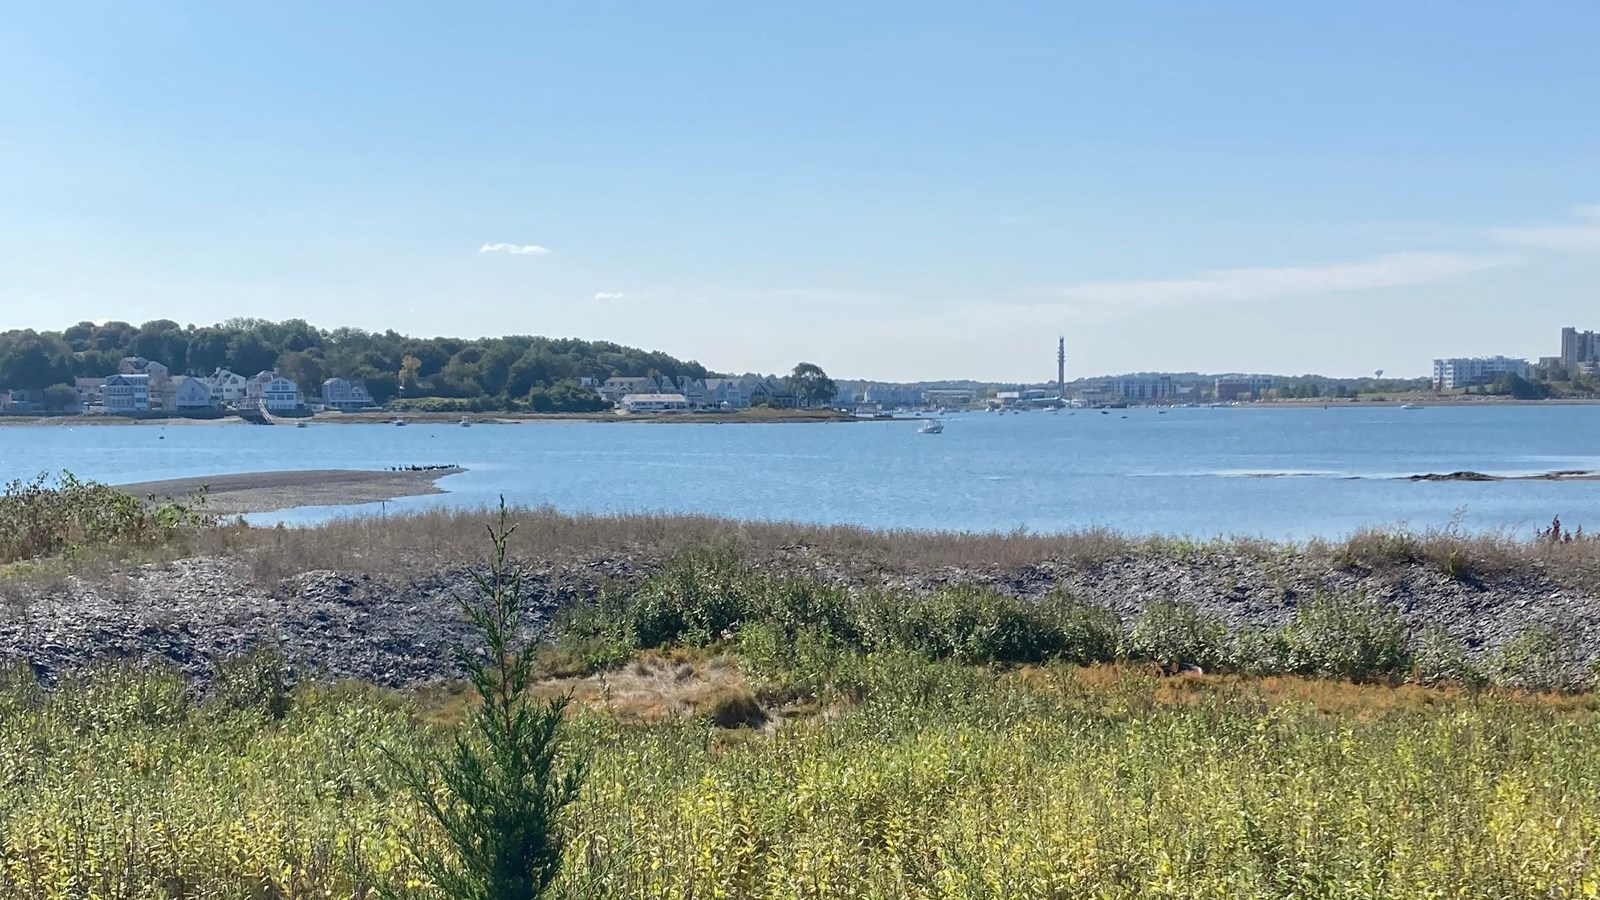 Looking out into the harbor, the Hingham skyline in the distance and the foreground has green  grass